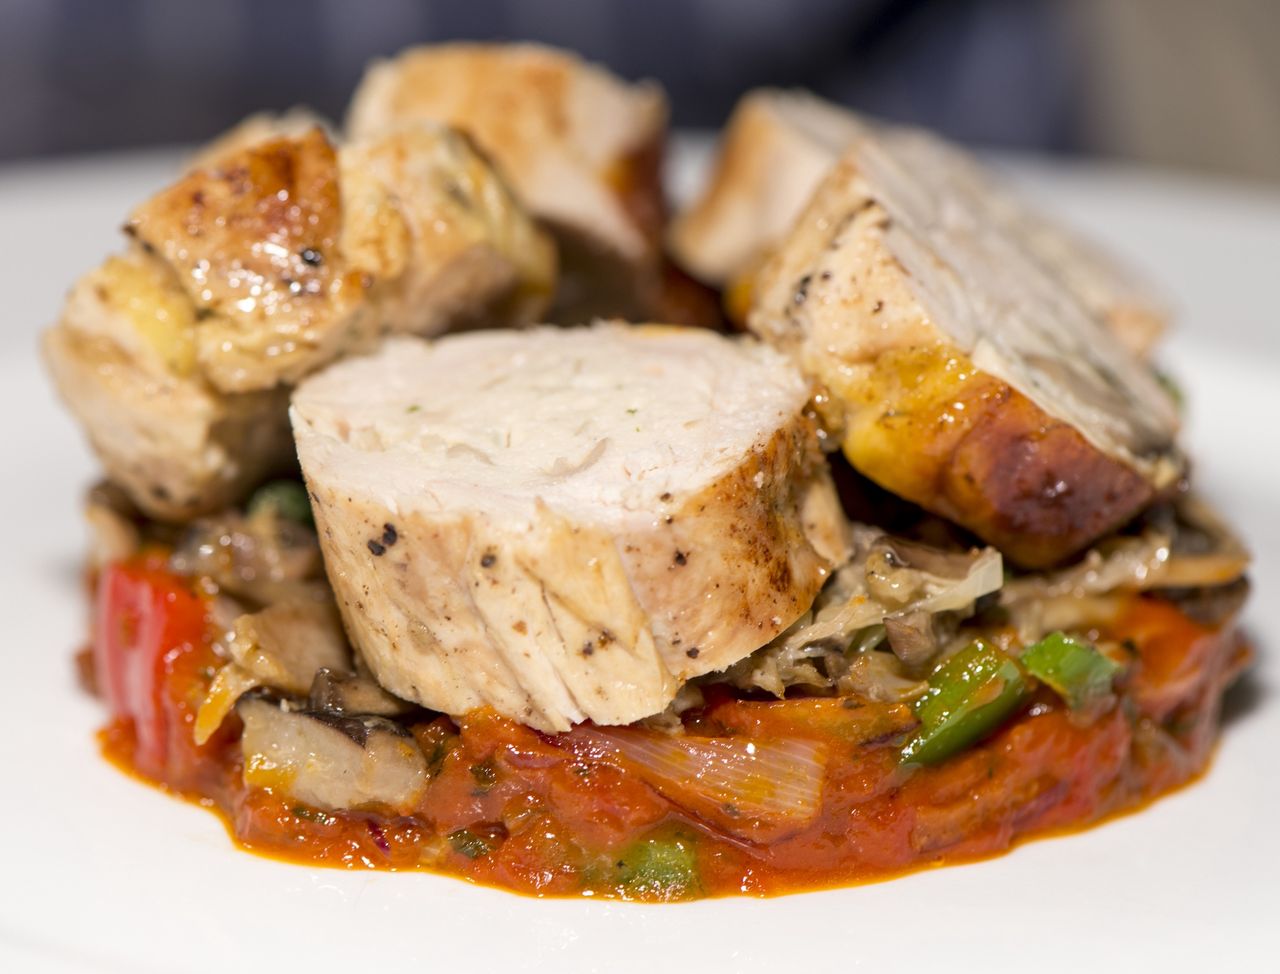 Guinea fowl meat is one of the healthiest.